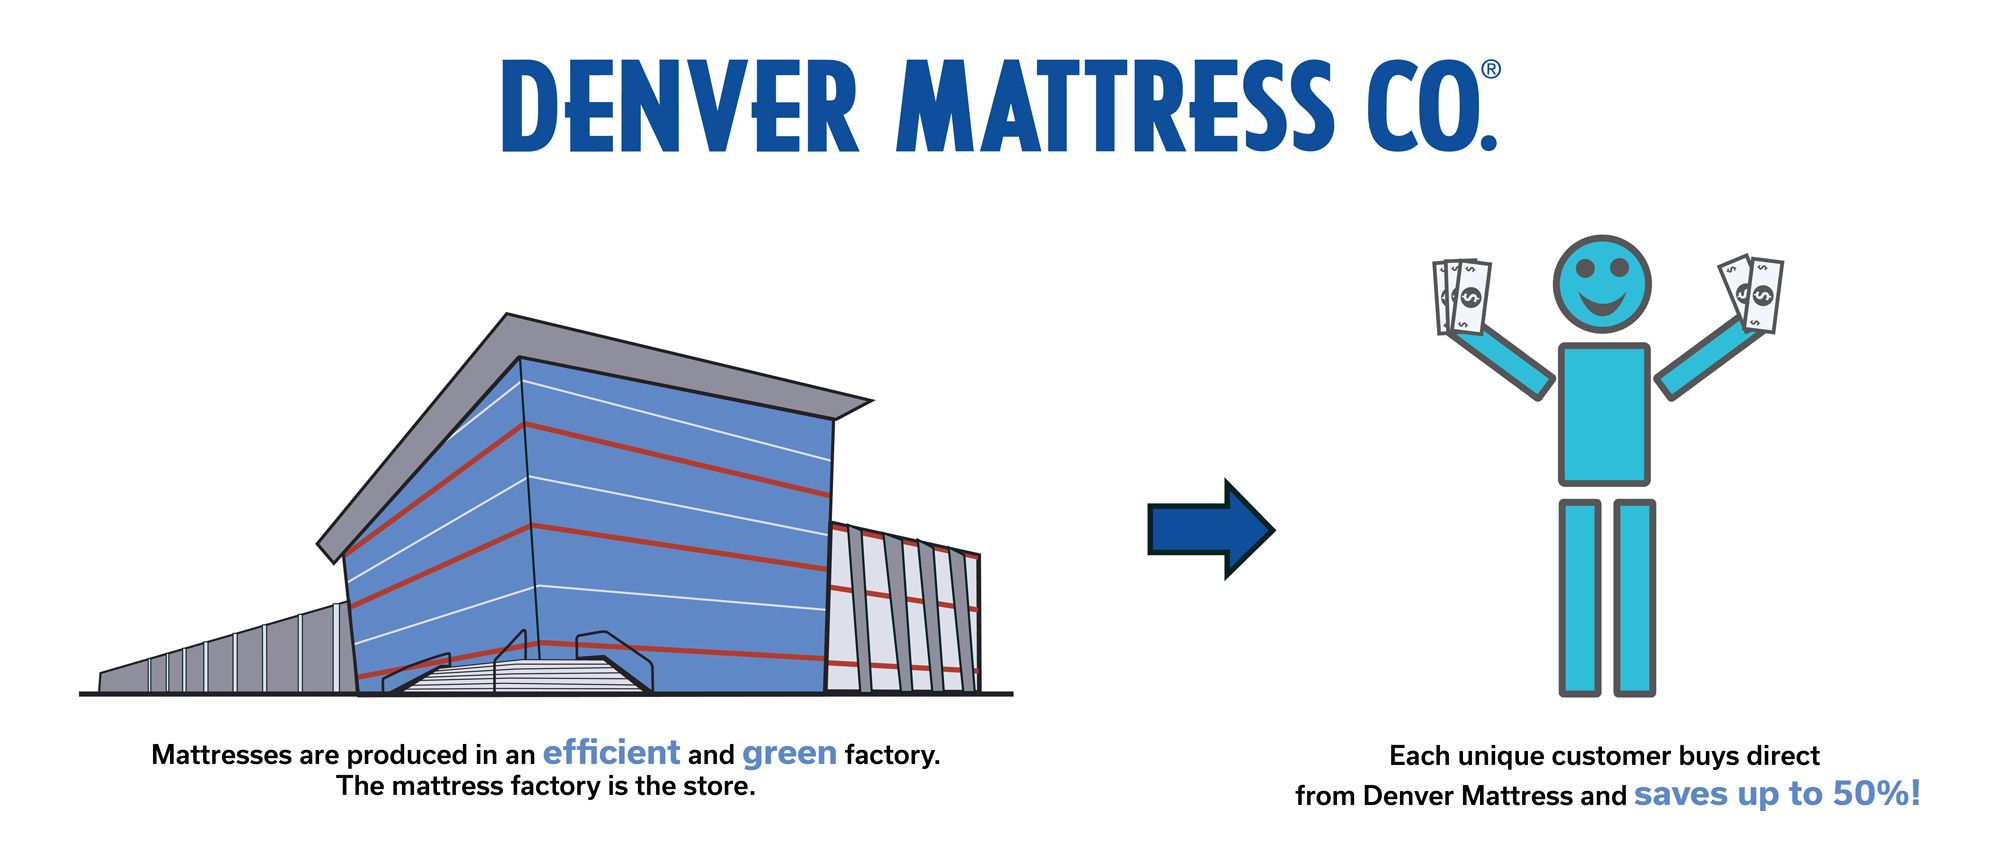 Denver Mattress Process: Step 1 Mattress Produced at an efficient and green factory and shipped directly to store , Step 2 Each Customer buys direct from Denver Mattress and saves up to 50%